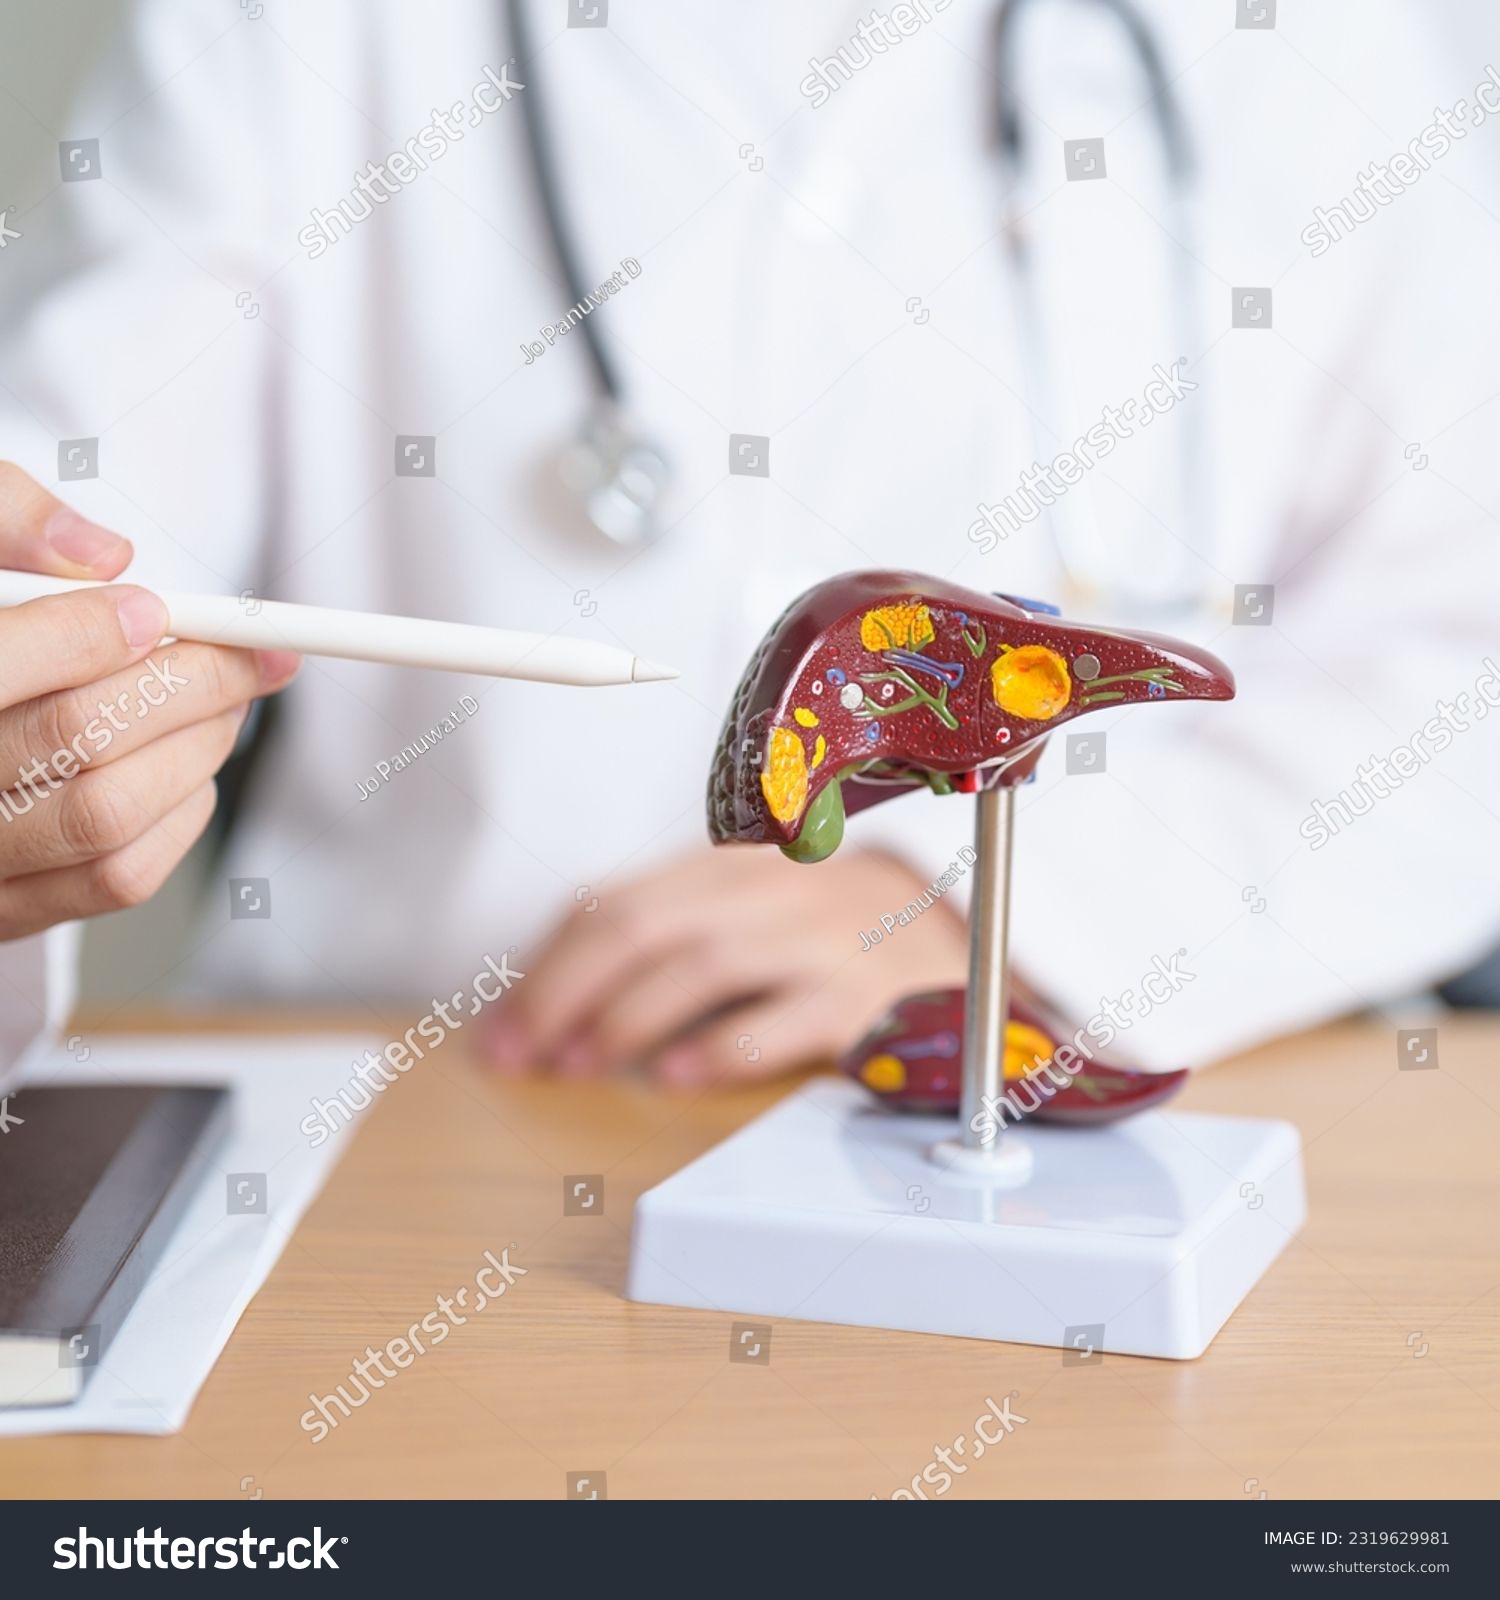 Doctor with human Liver anatomy model. Liver cancer and Tumor, Jaundice, Viral Hepatitis A, B, C, D, E, Cirrhosis, Failure, Enlarged, Hepatic Encephalopathy, Ascites Fluid in Belly and health concept #2319629981